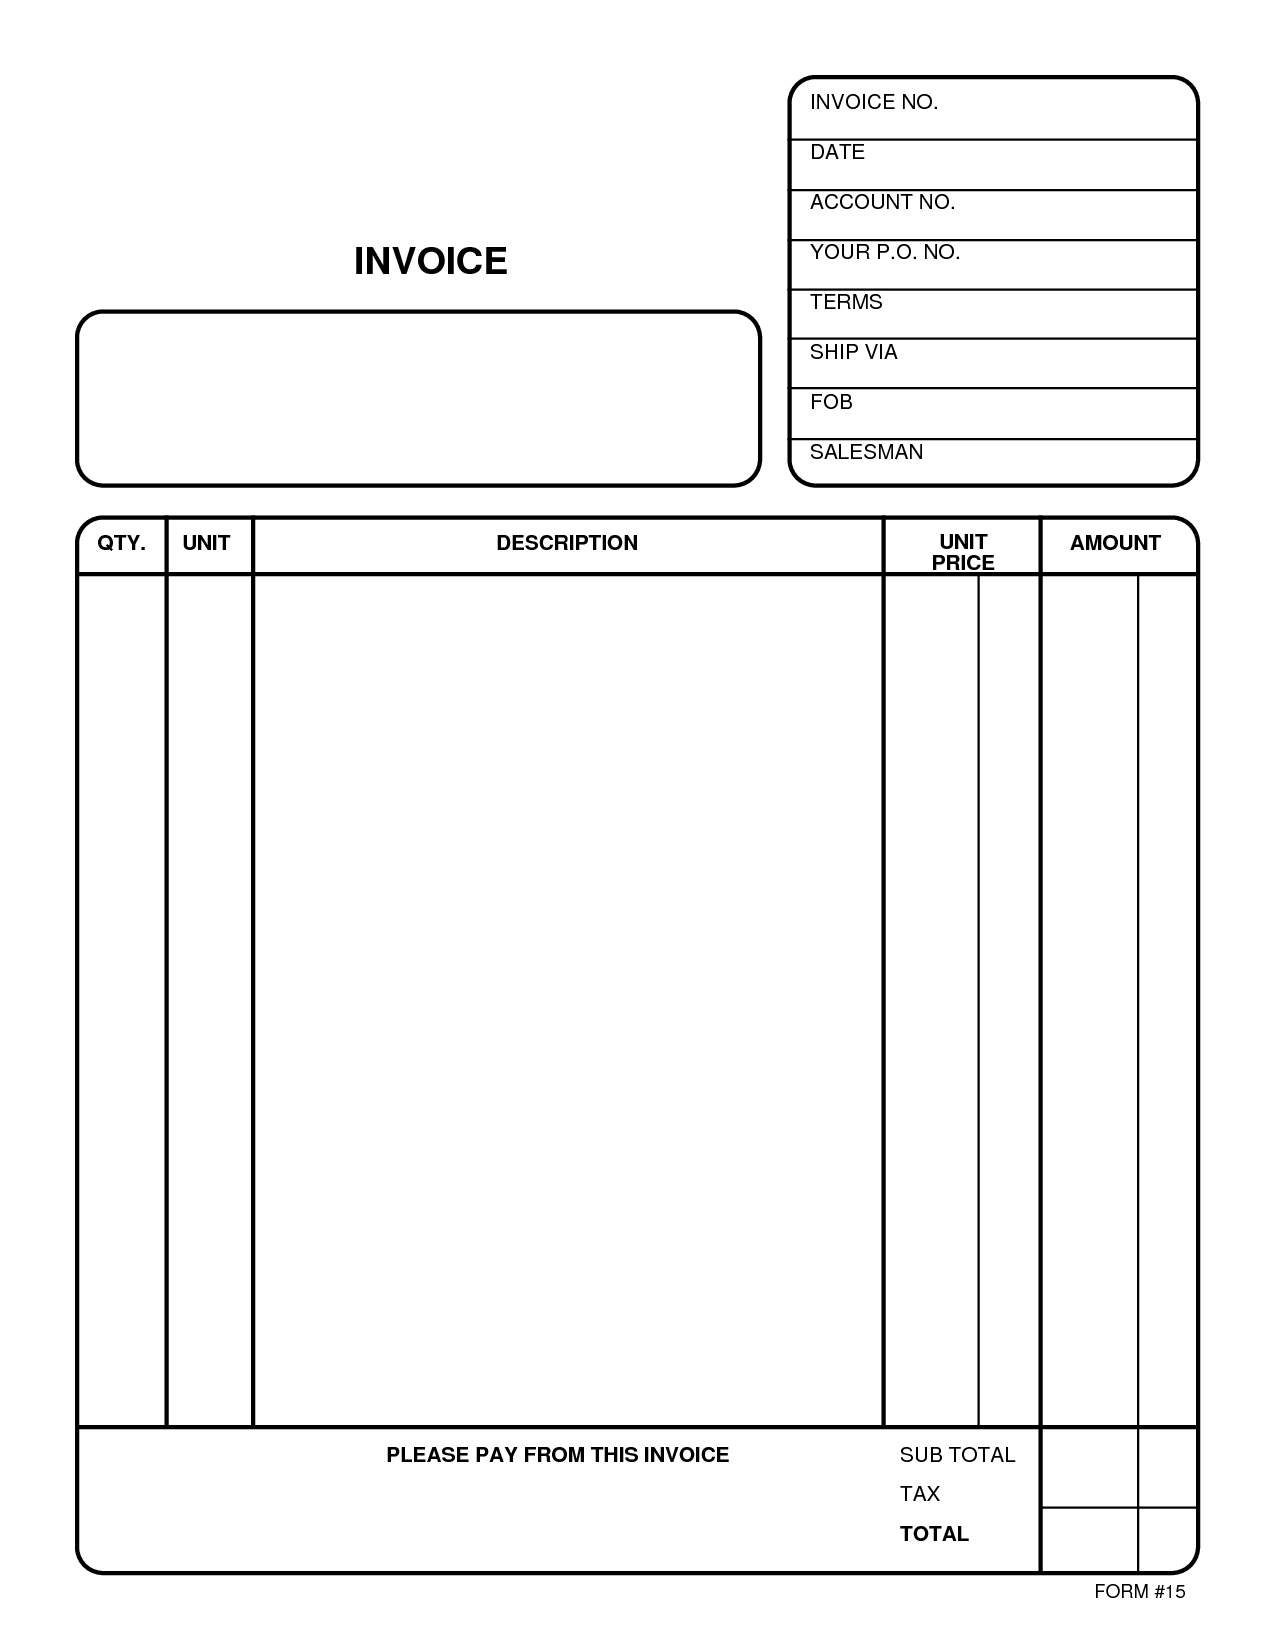 free pdf invoice free blank invoice template pdf and creating invoices free free 1275 X 1650